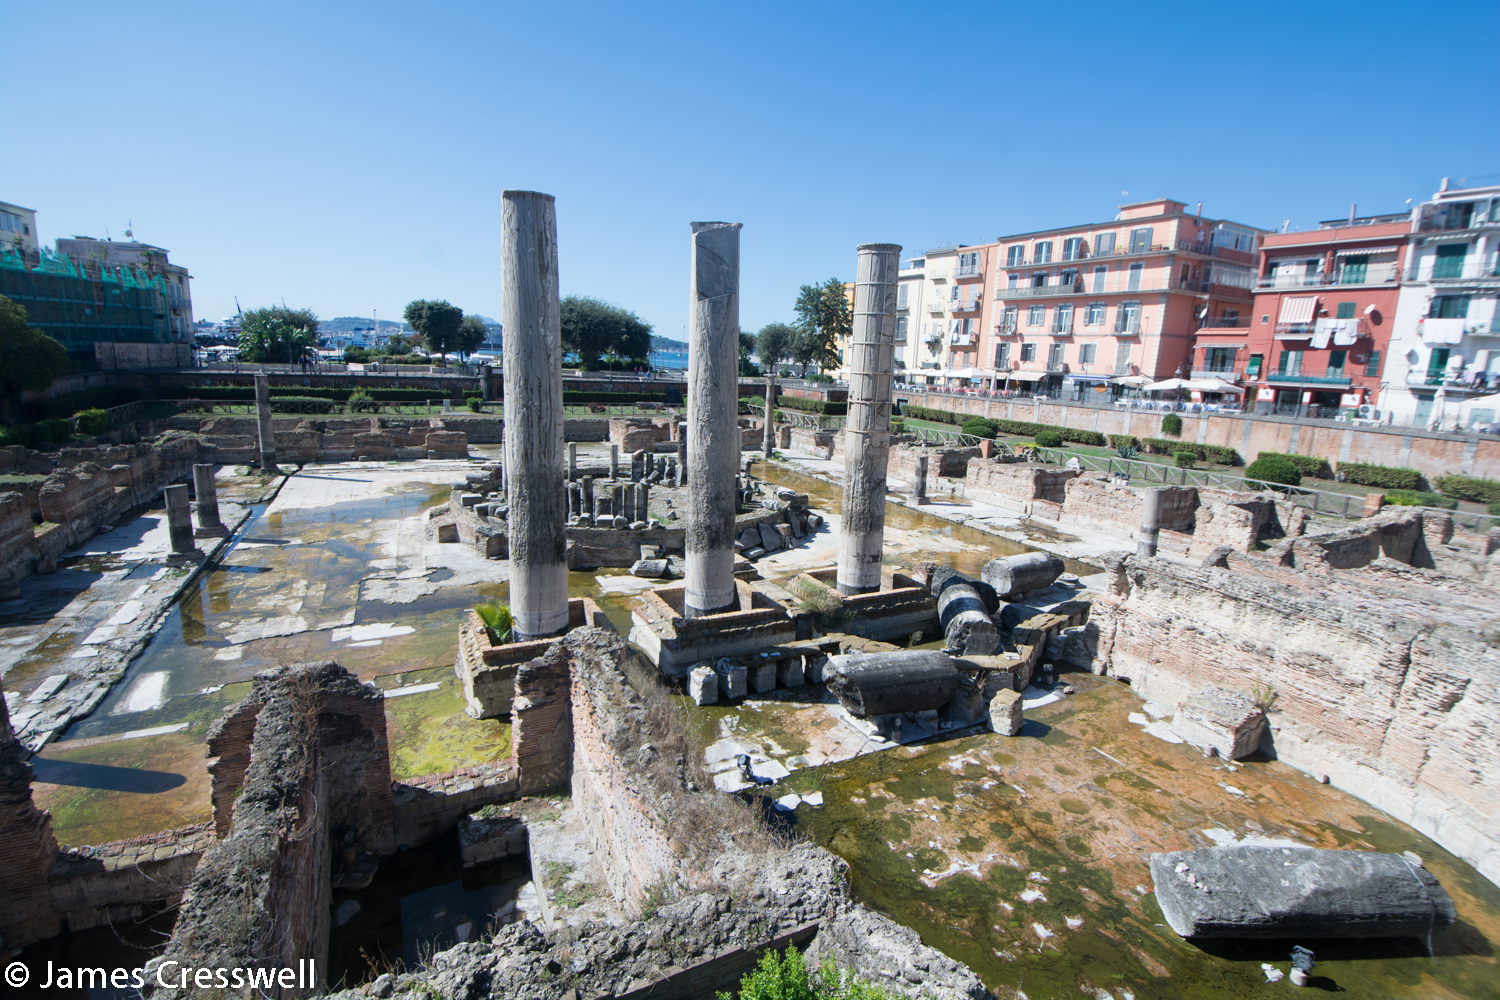 View of a Roman temple in a town